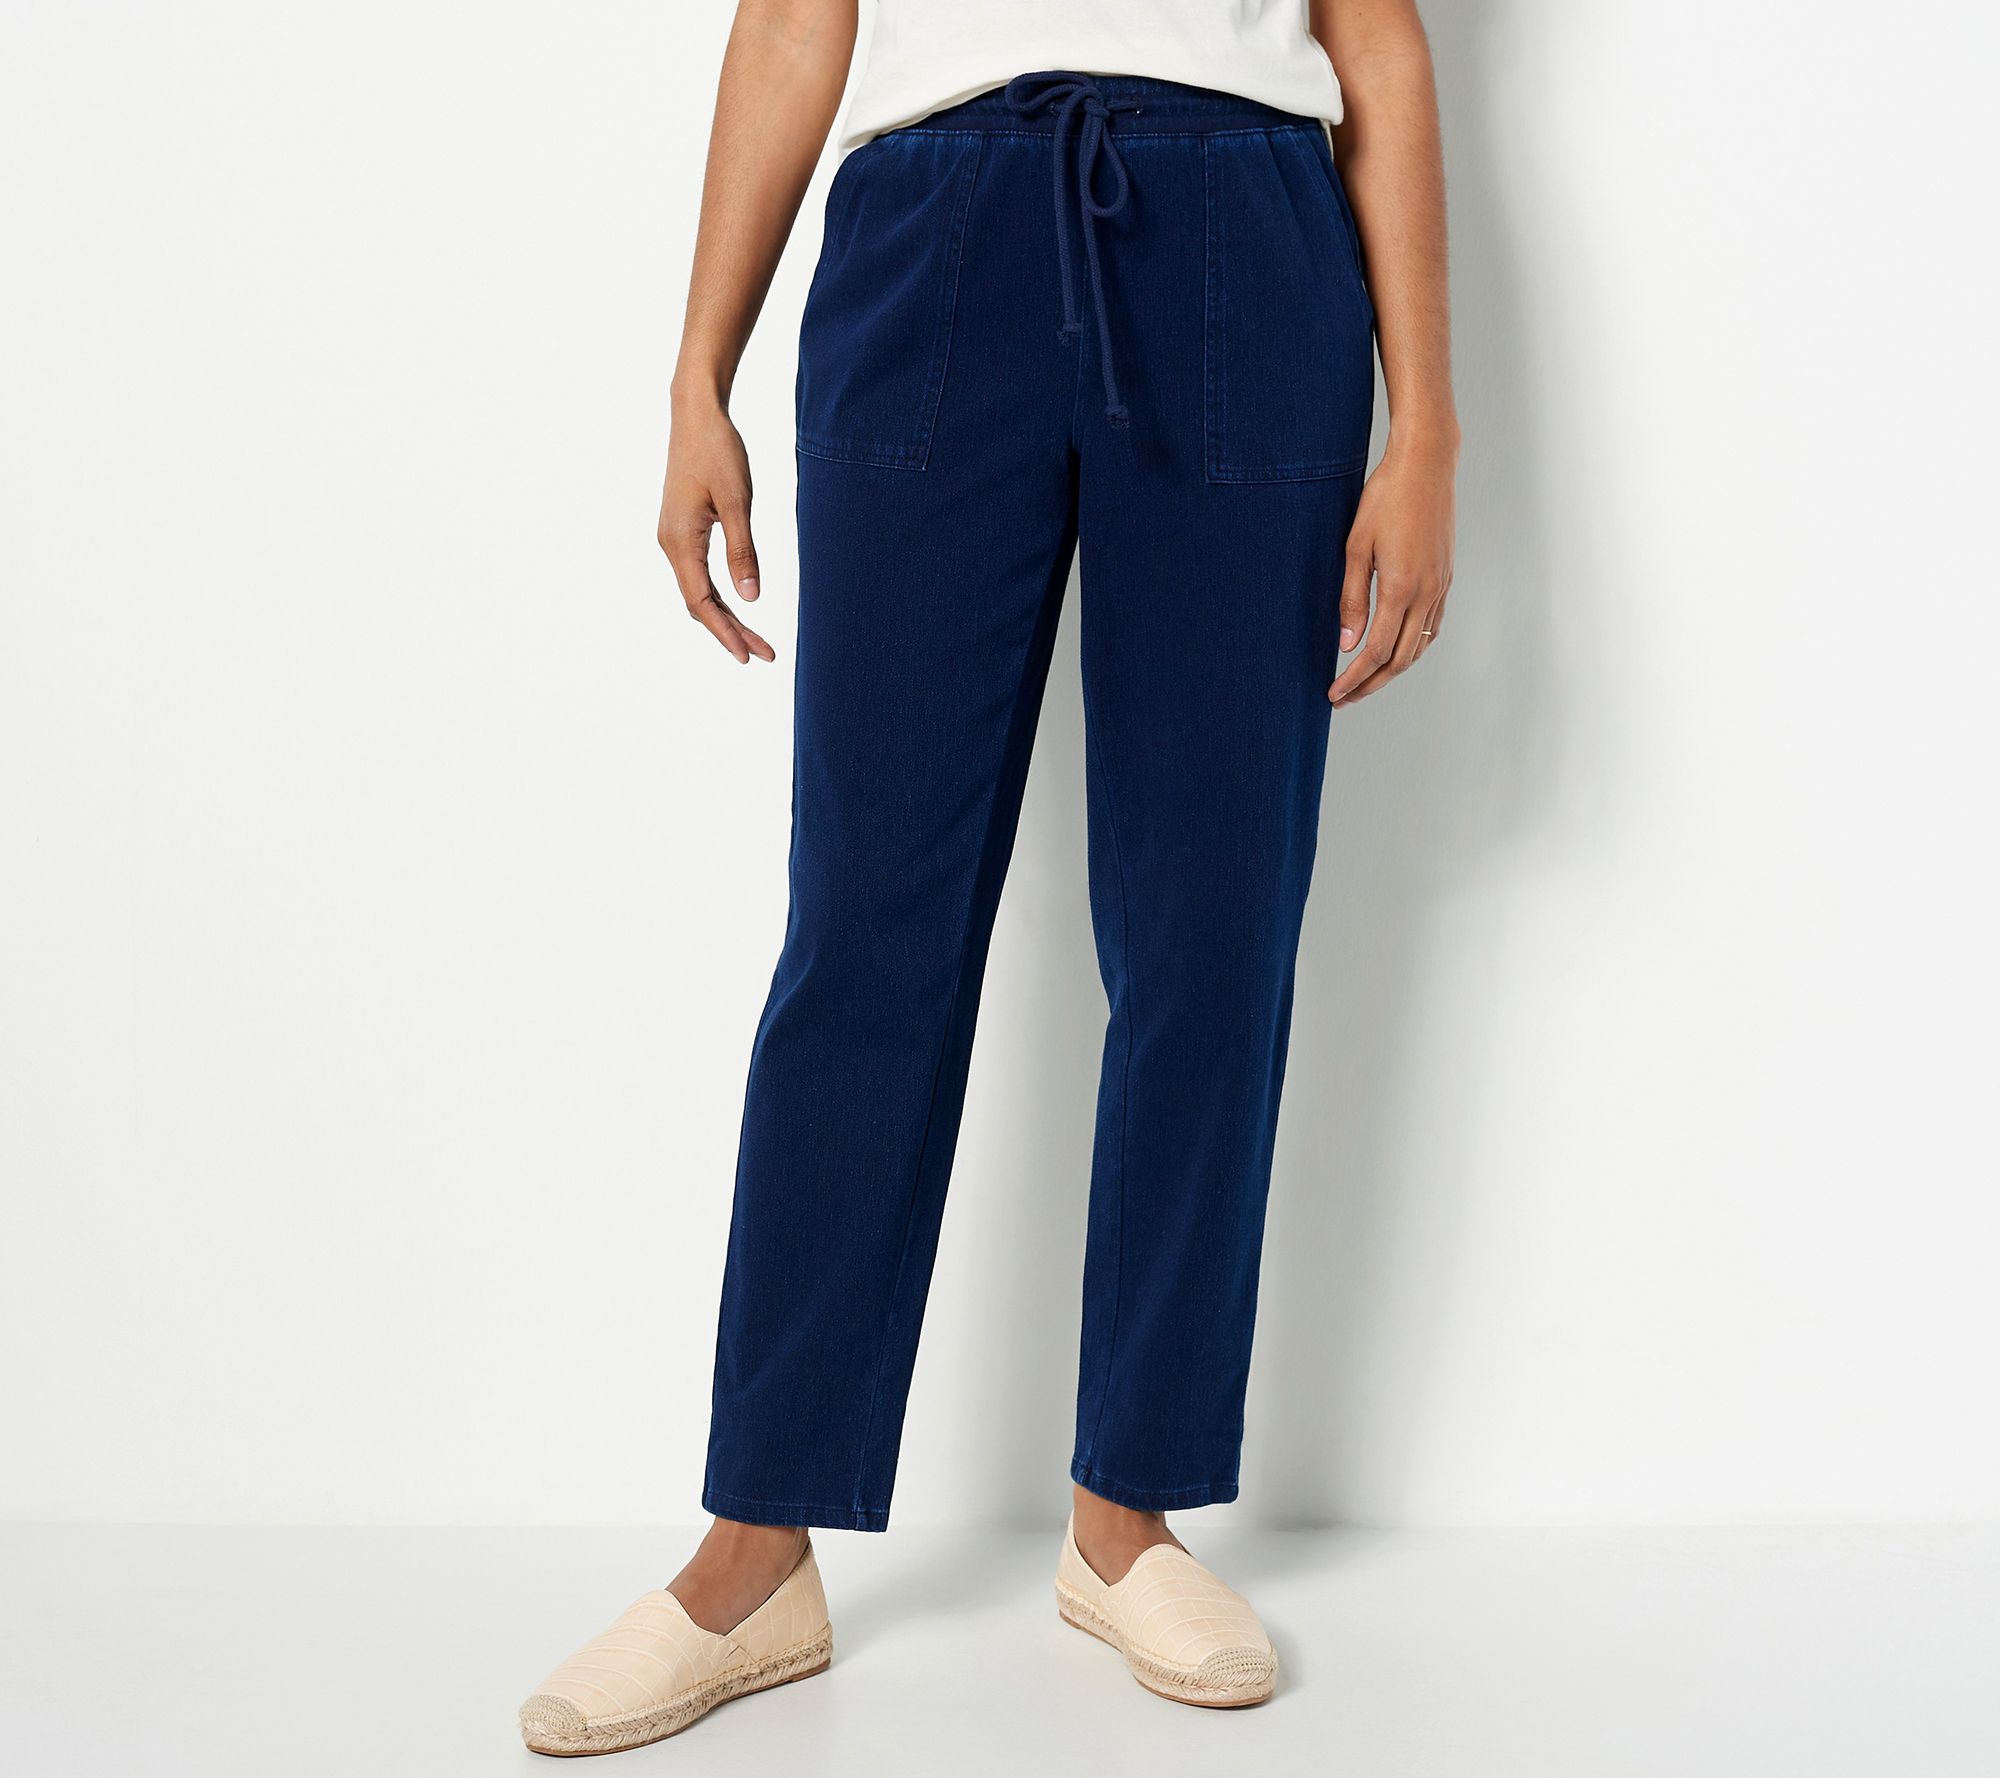 Denim & Co. Comfy Knit Air Petite Straight Crop Pant with Side Slits 